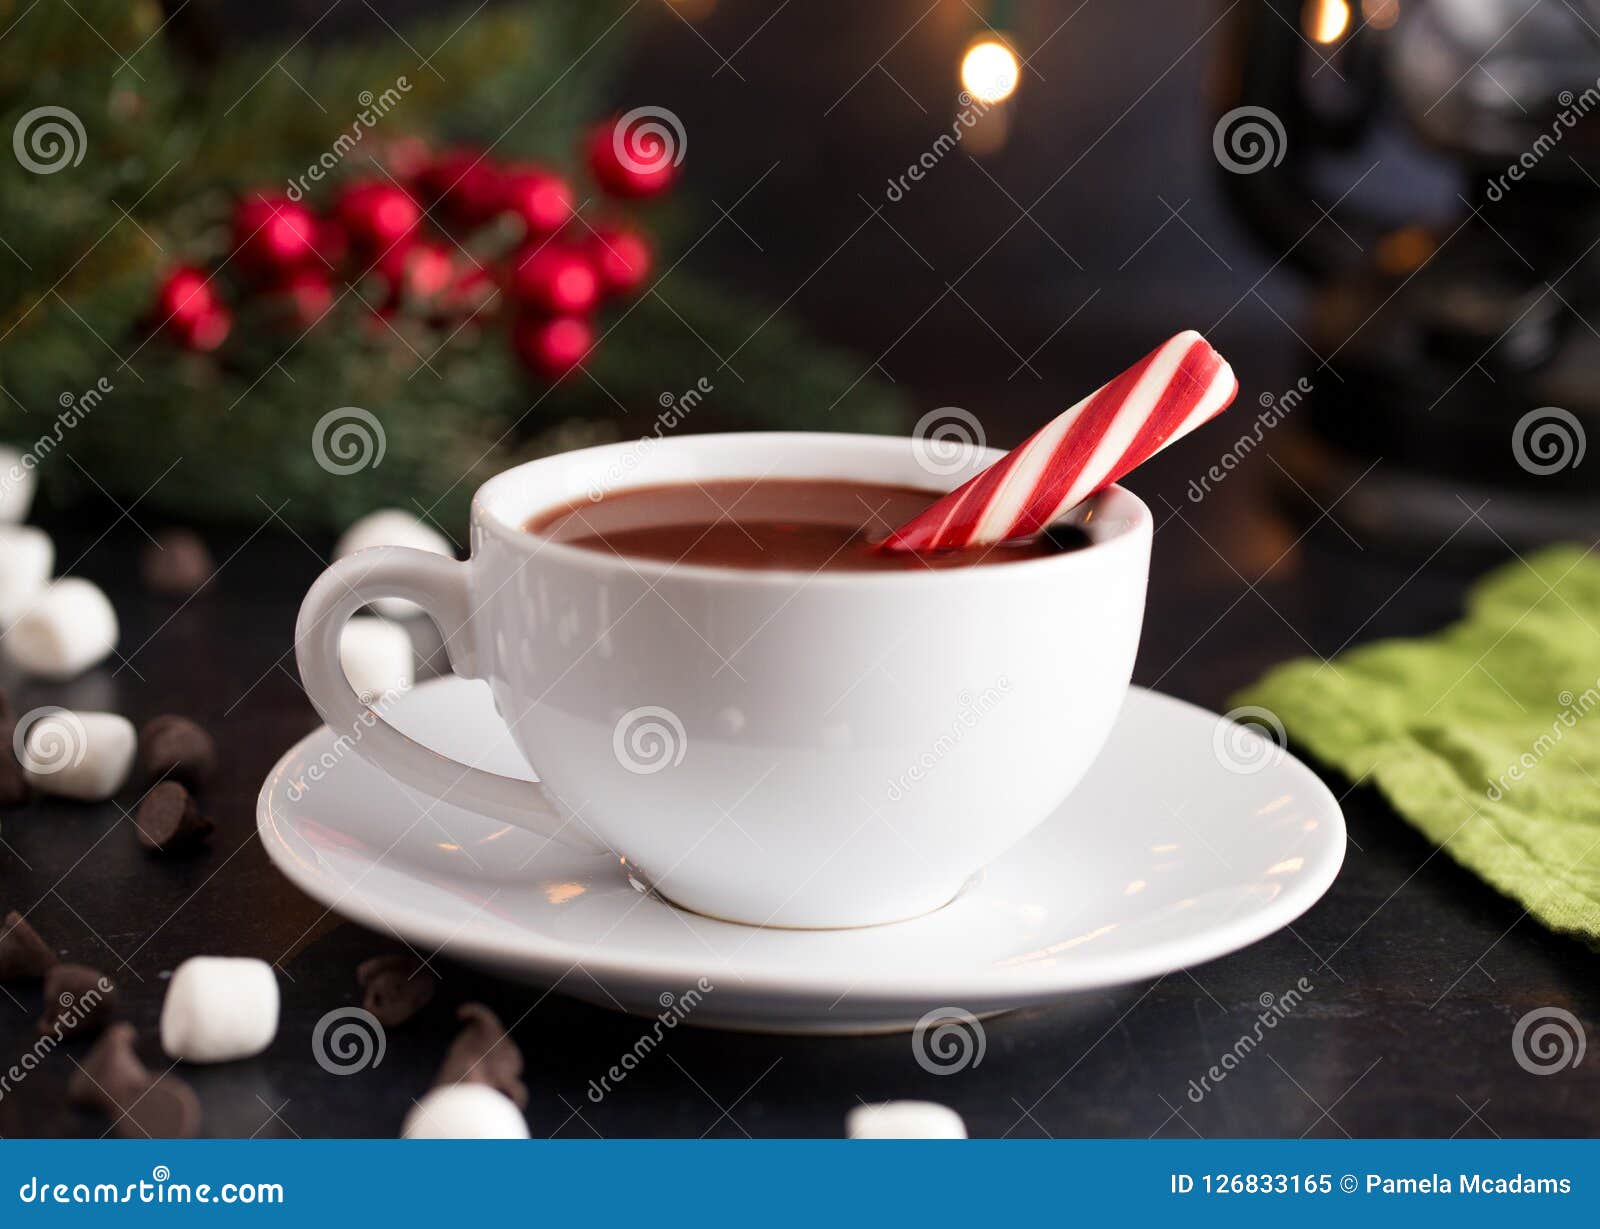 Hot Chocolate on a Table Set for the Holidays Stock Image - Image of ...